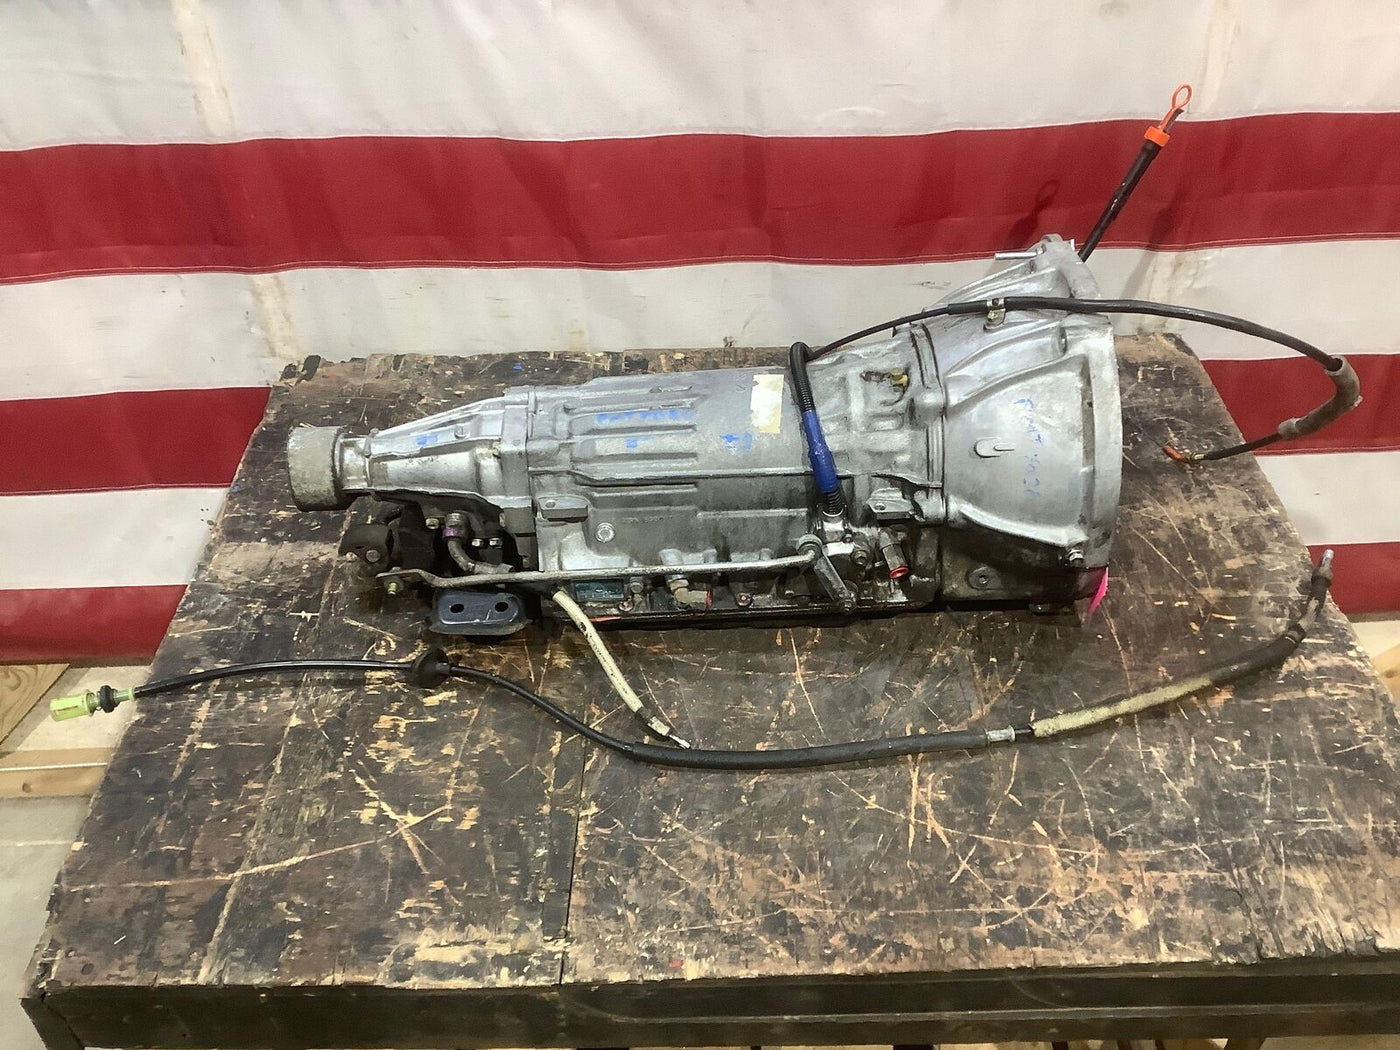 89-93 Toyota Supra Turbo 7MGTE 4 Speed Automatic Transmission A340E Video Tested